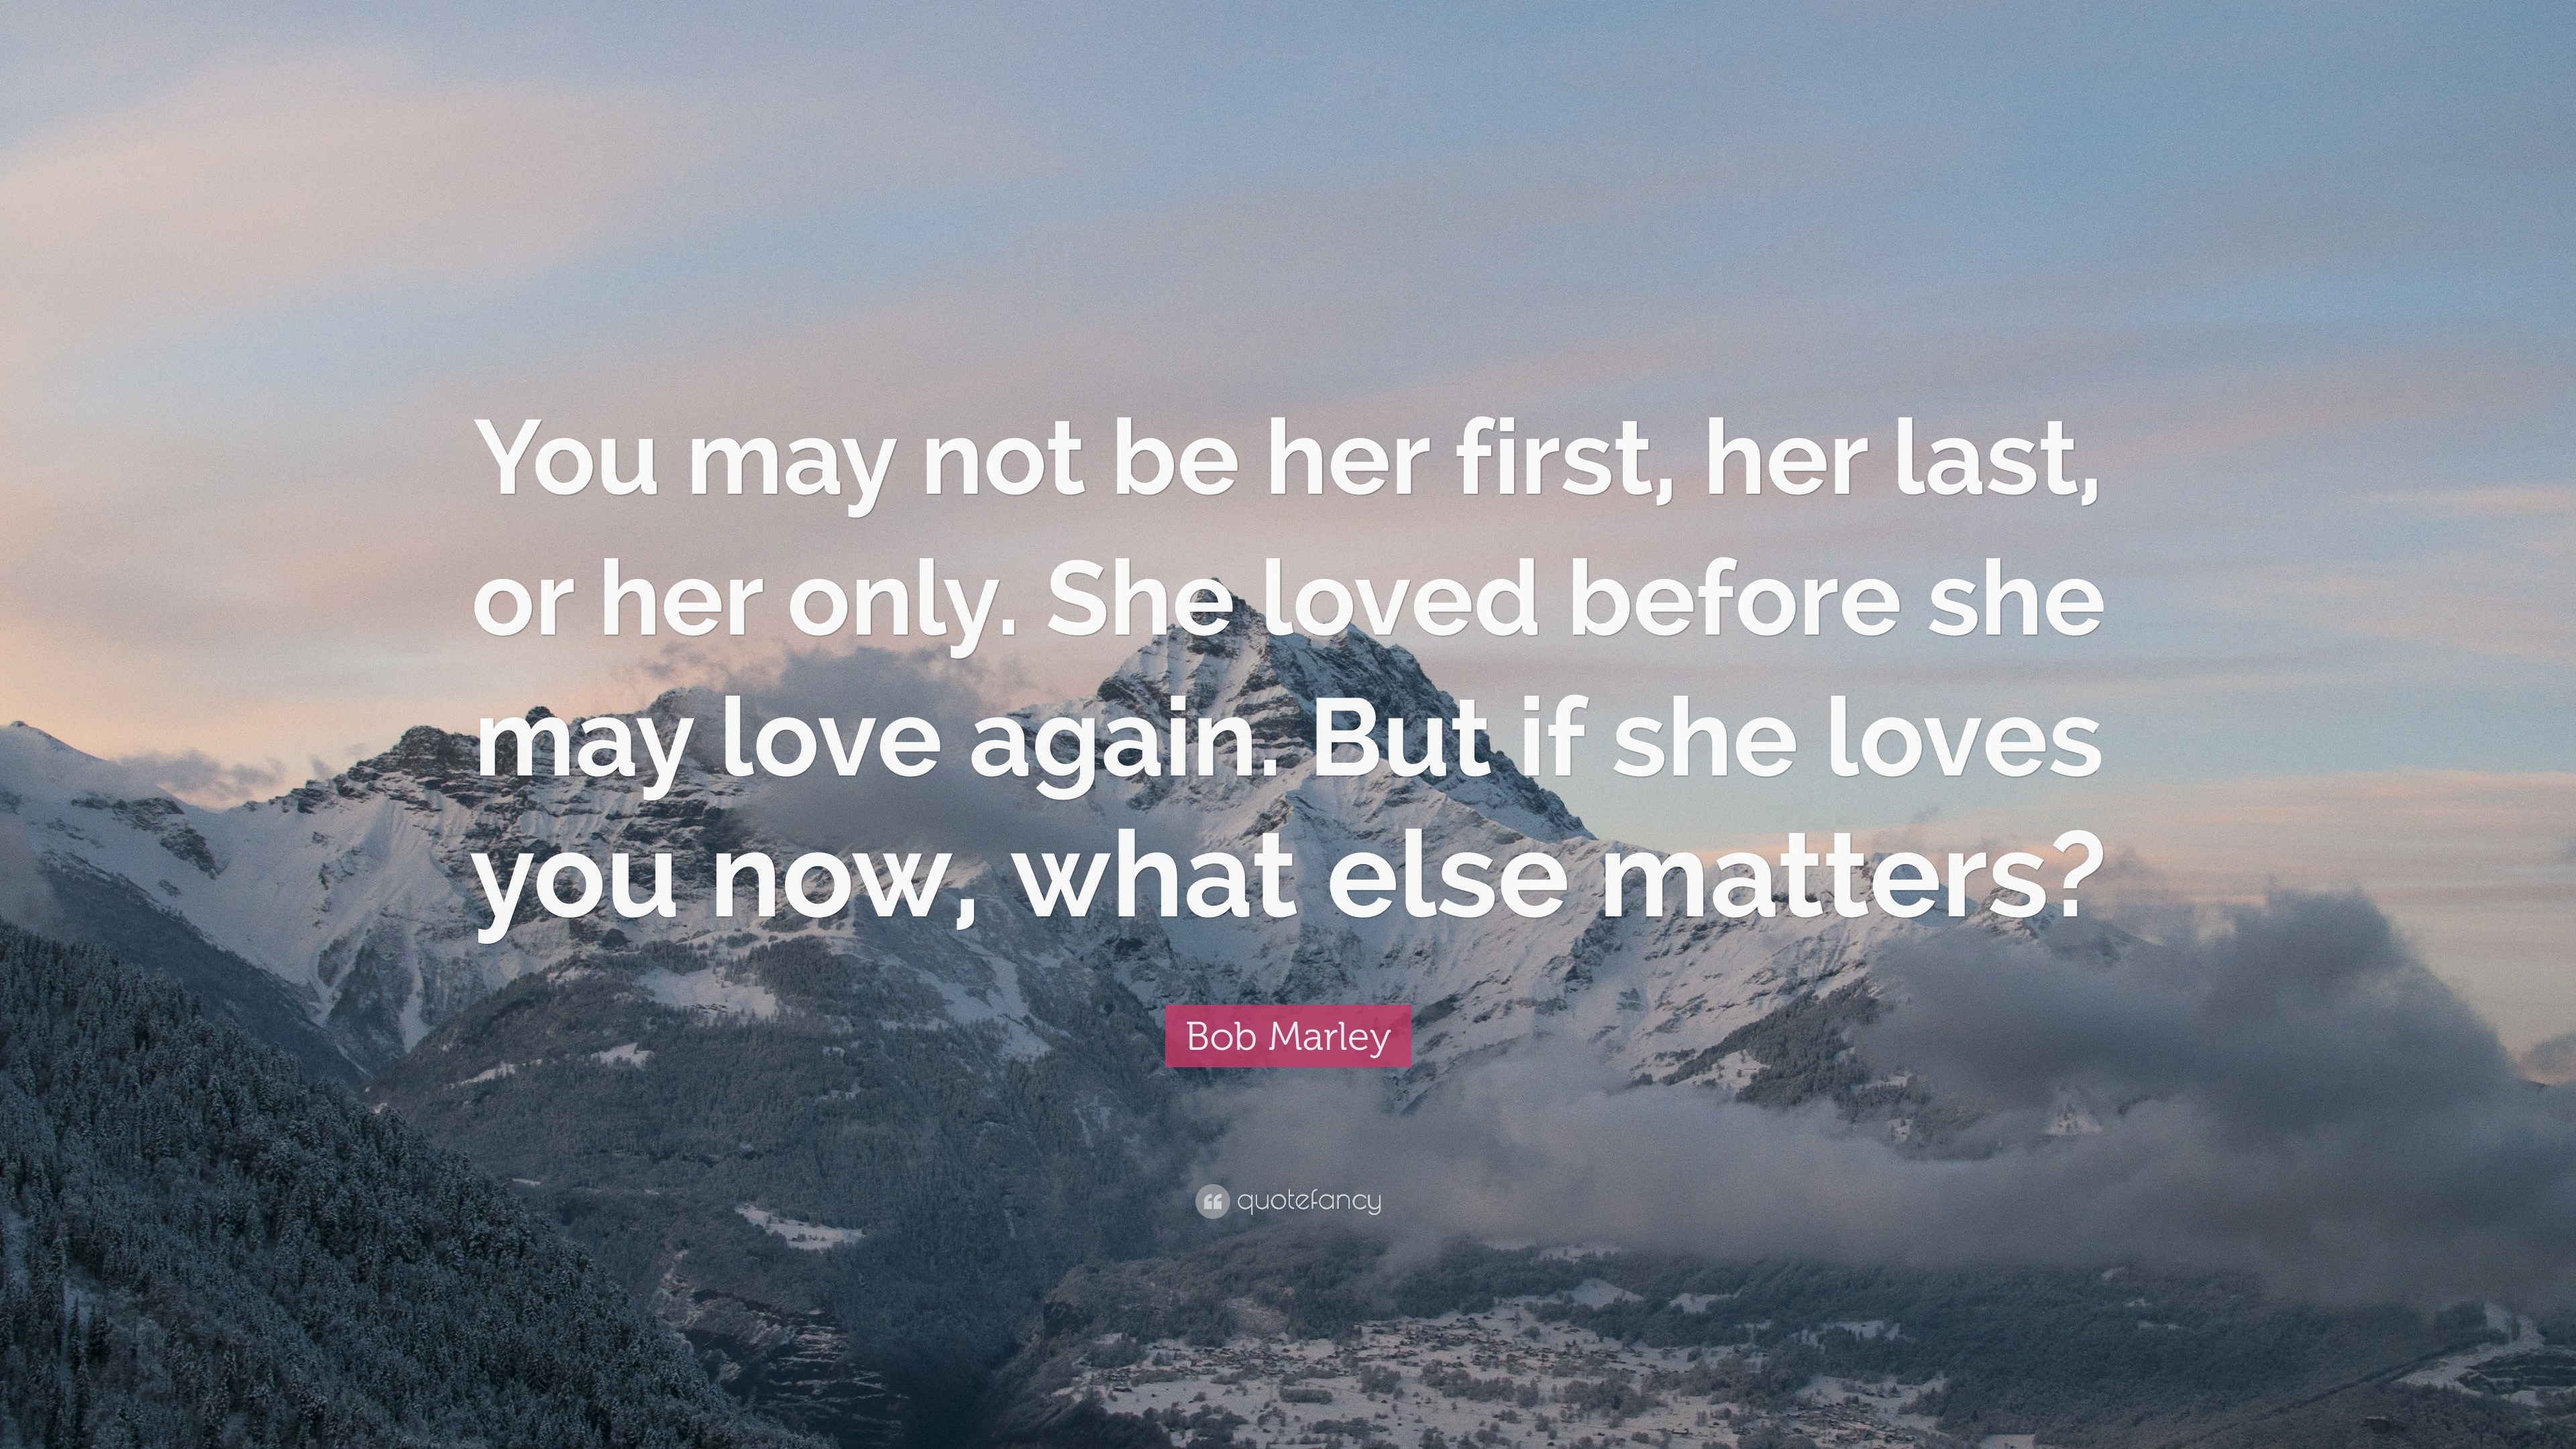 Bob Marley Quote You May Not Be Her First Her Last Or Her Only She Loved Before She May Love Again But If She Loves You Now What Els